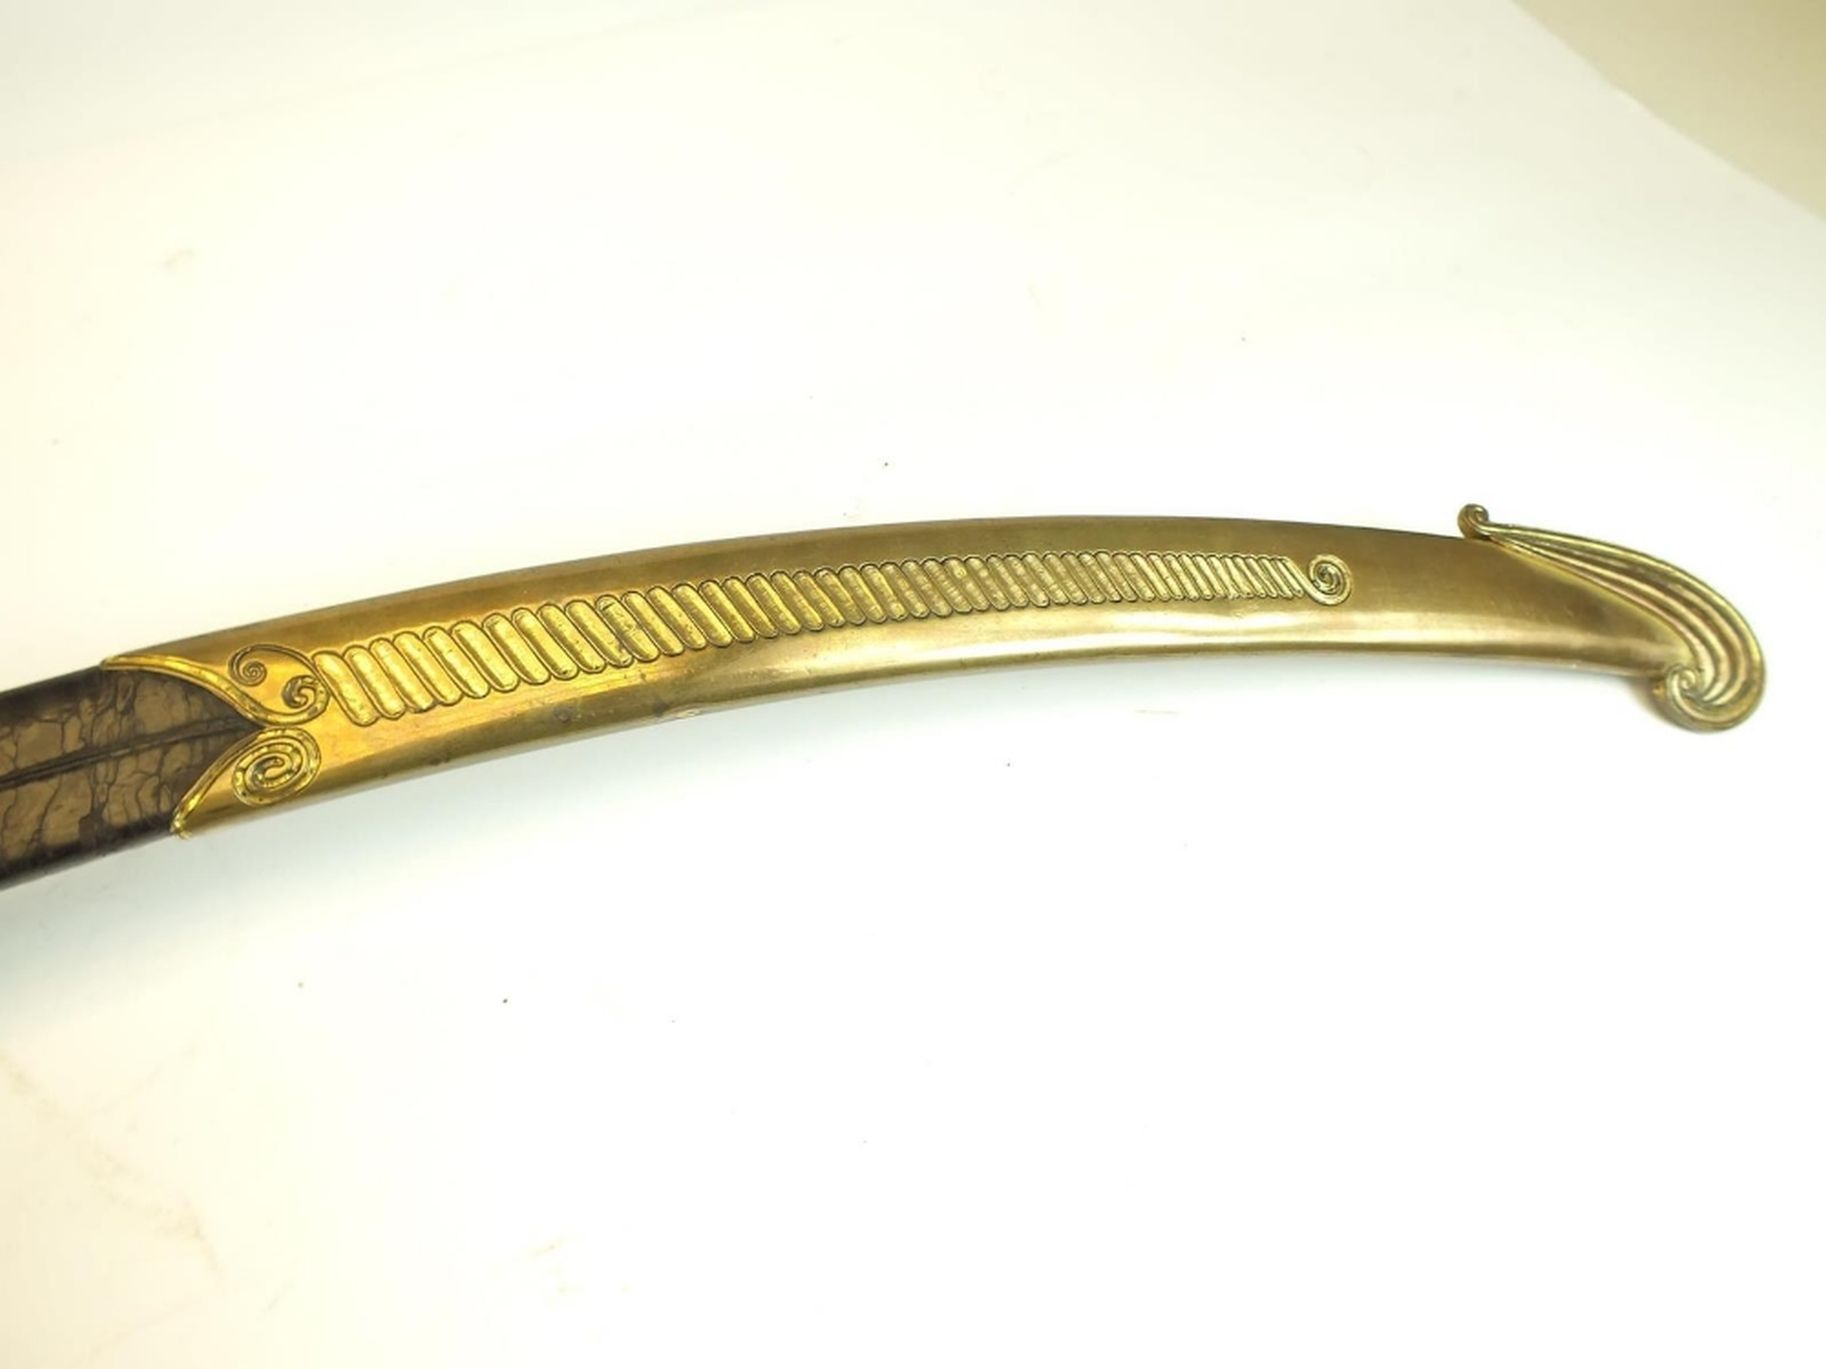 A LATE 18TH OR EARLY 19TH CENTURY PRESENTATION QUALITY SABRE BY PROSSER, 83cm sharply curved pipe- - Image 8 of 18